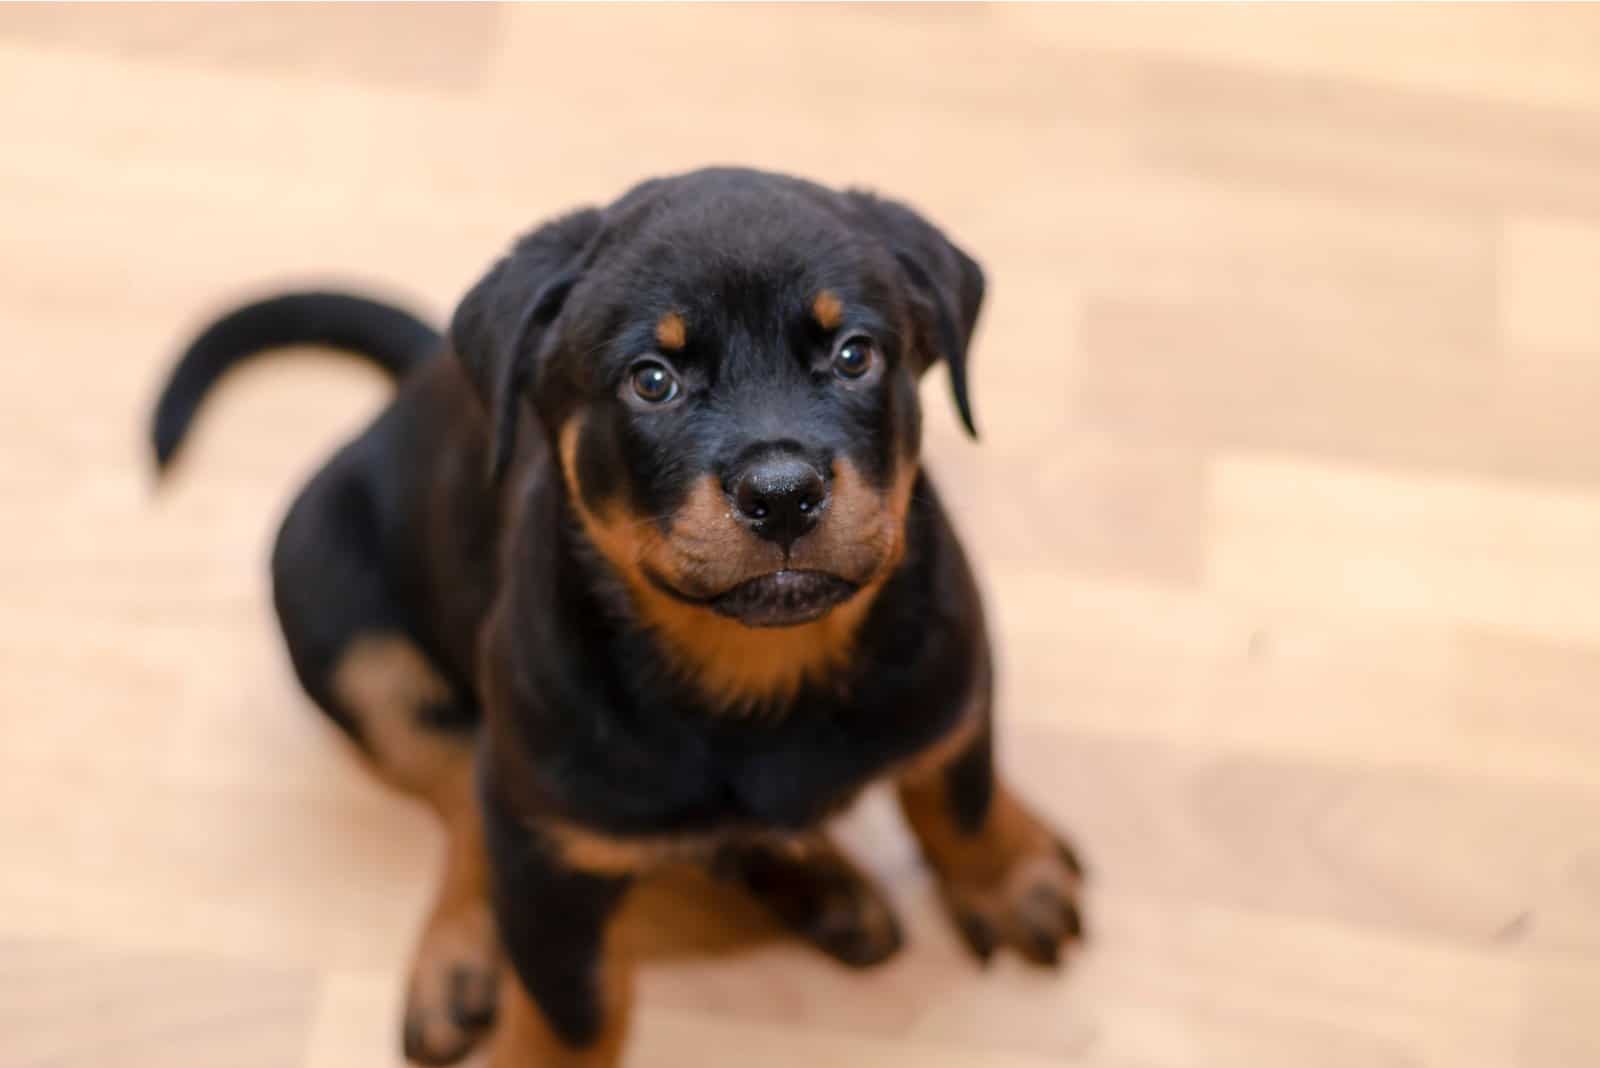 Rottweiler puppy looking up